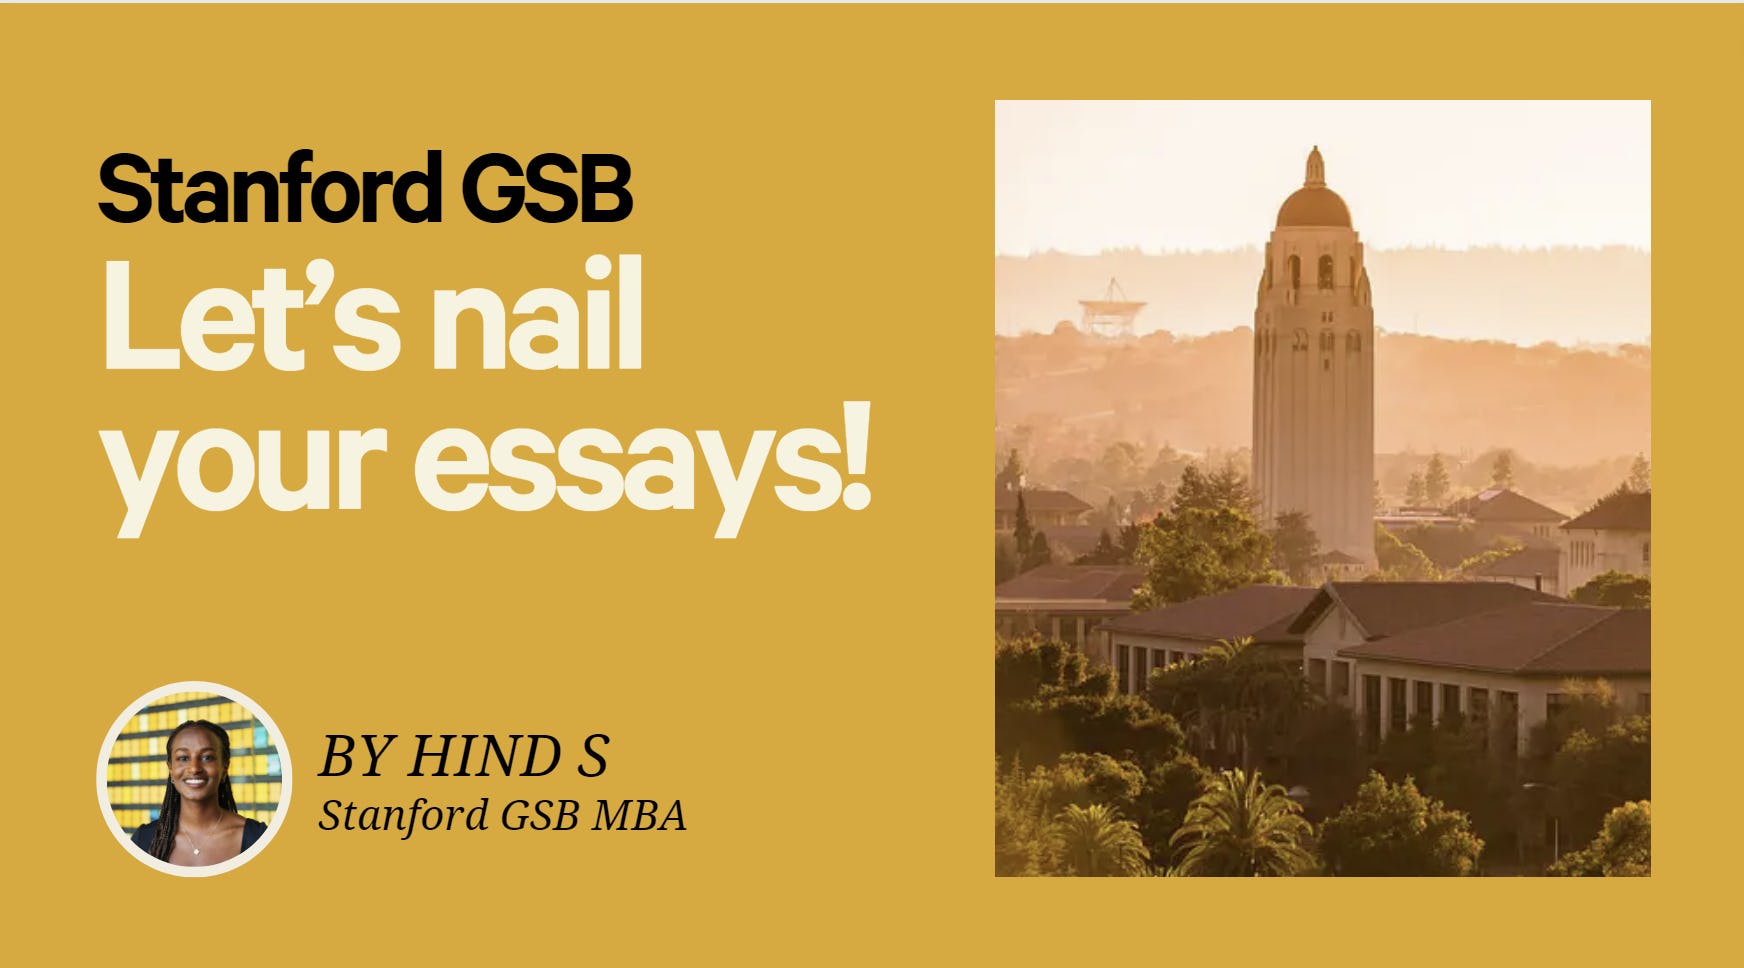 GSB "What matters most?" & "Why Stanford?" Essay Review